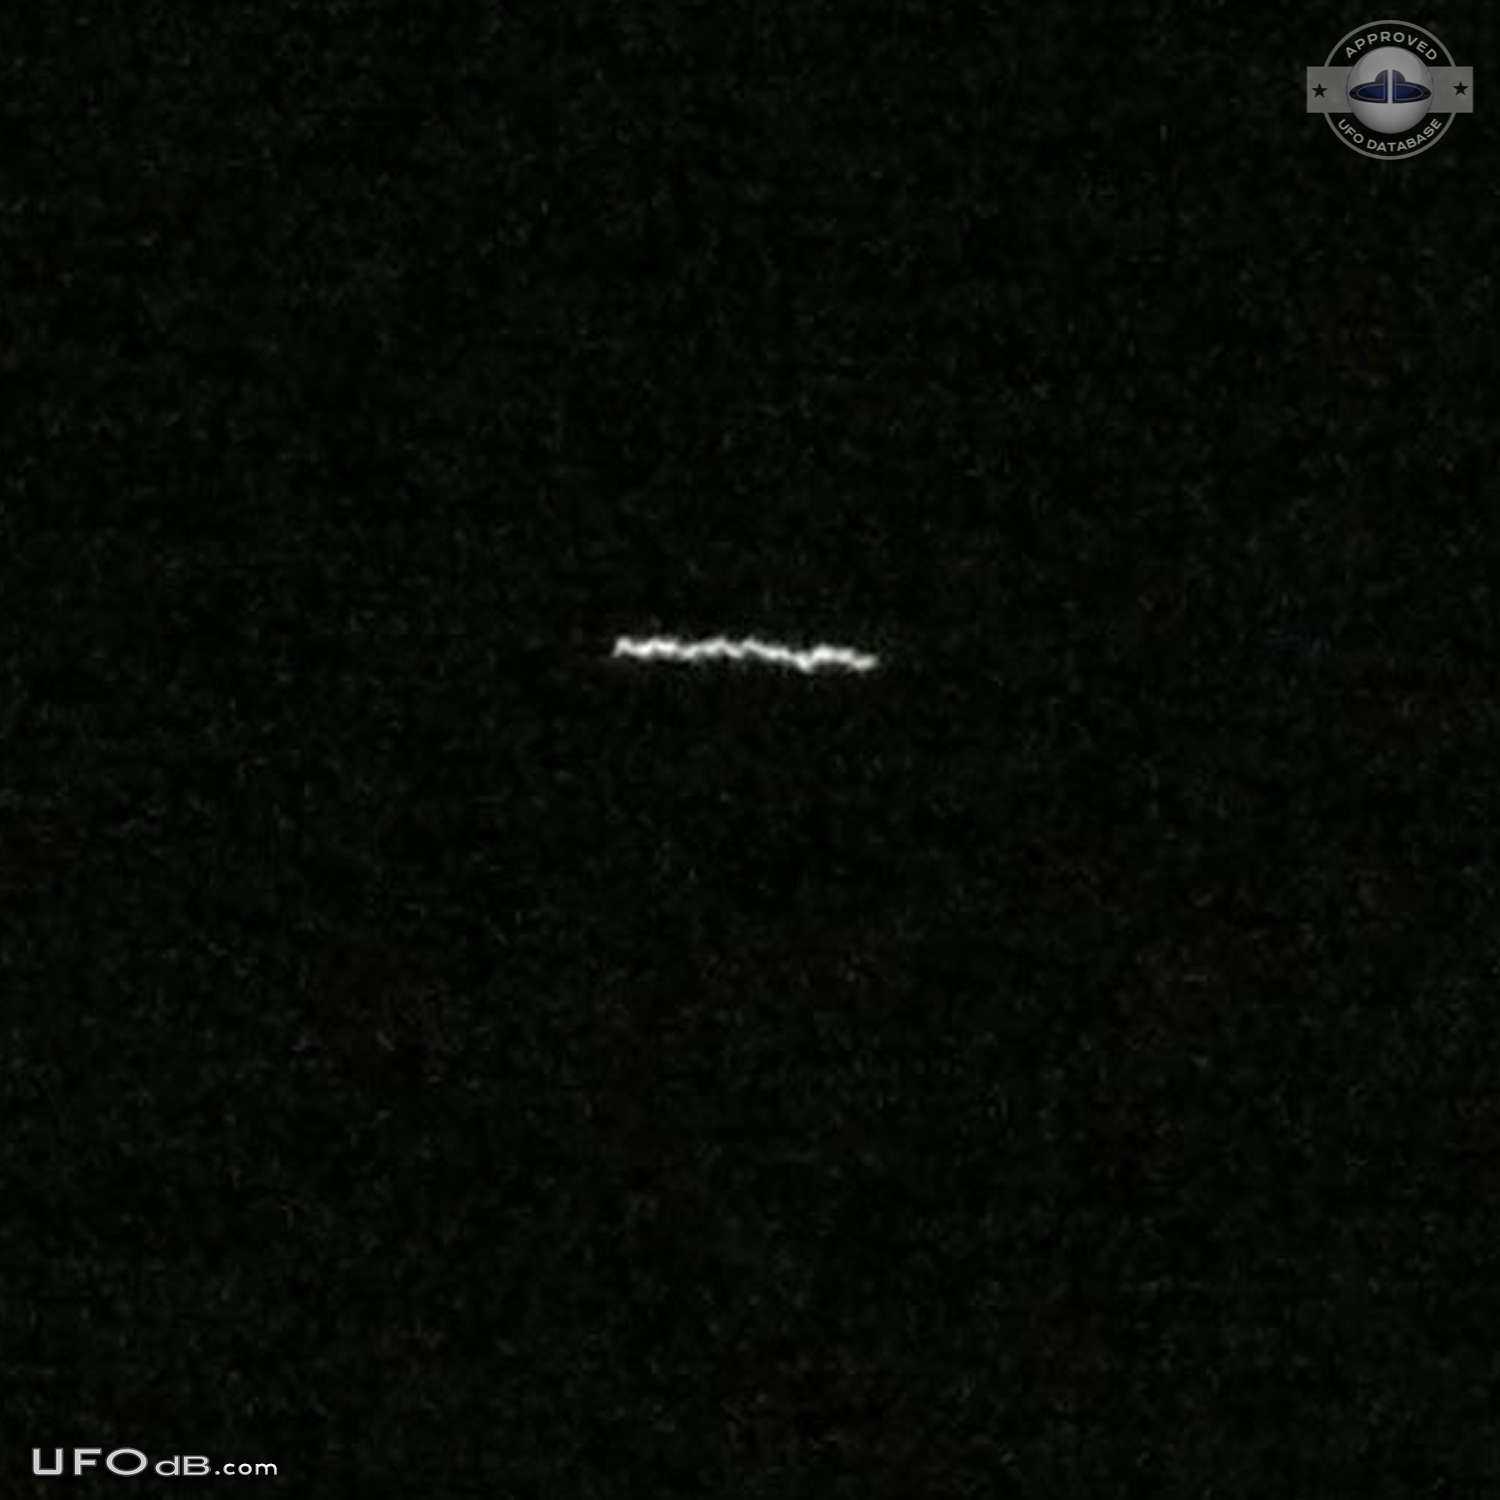 Straight line of white light UFO changing direction over Chichen Itza UFO Picture #635-1